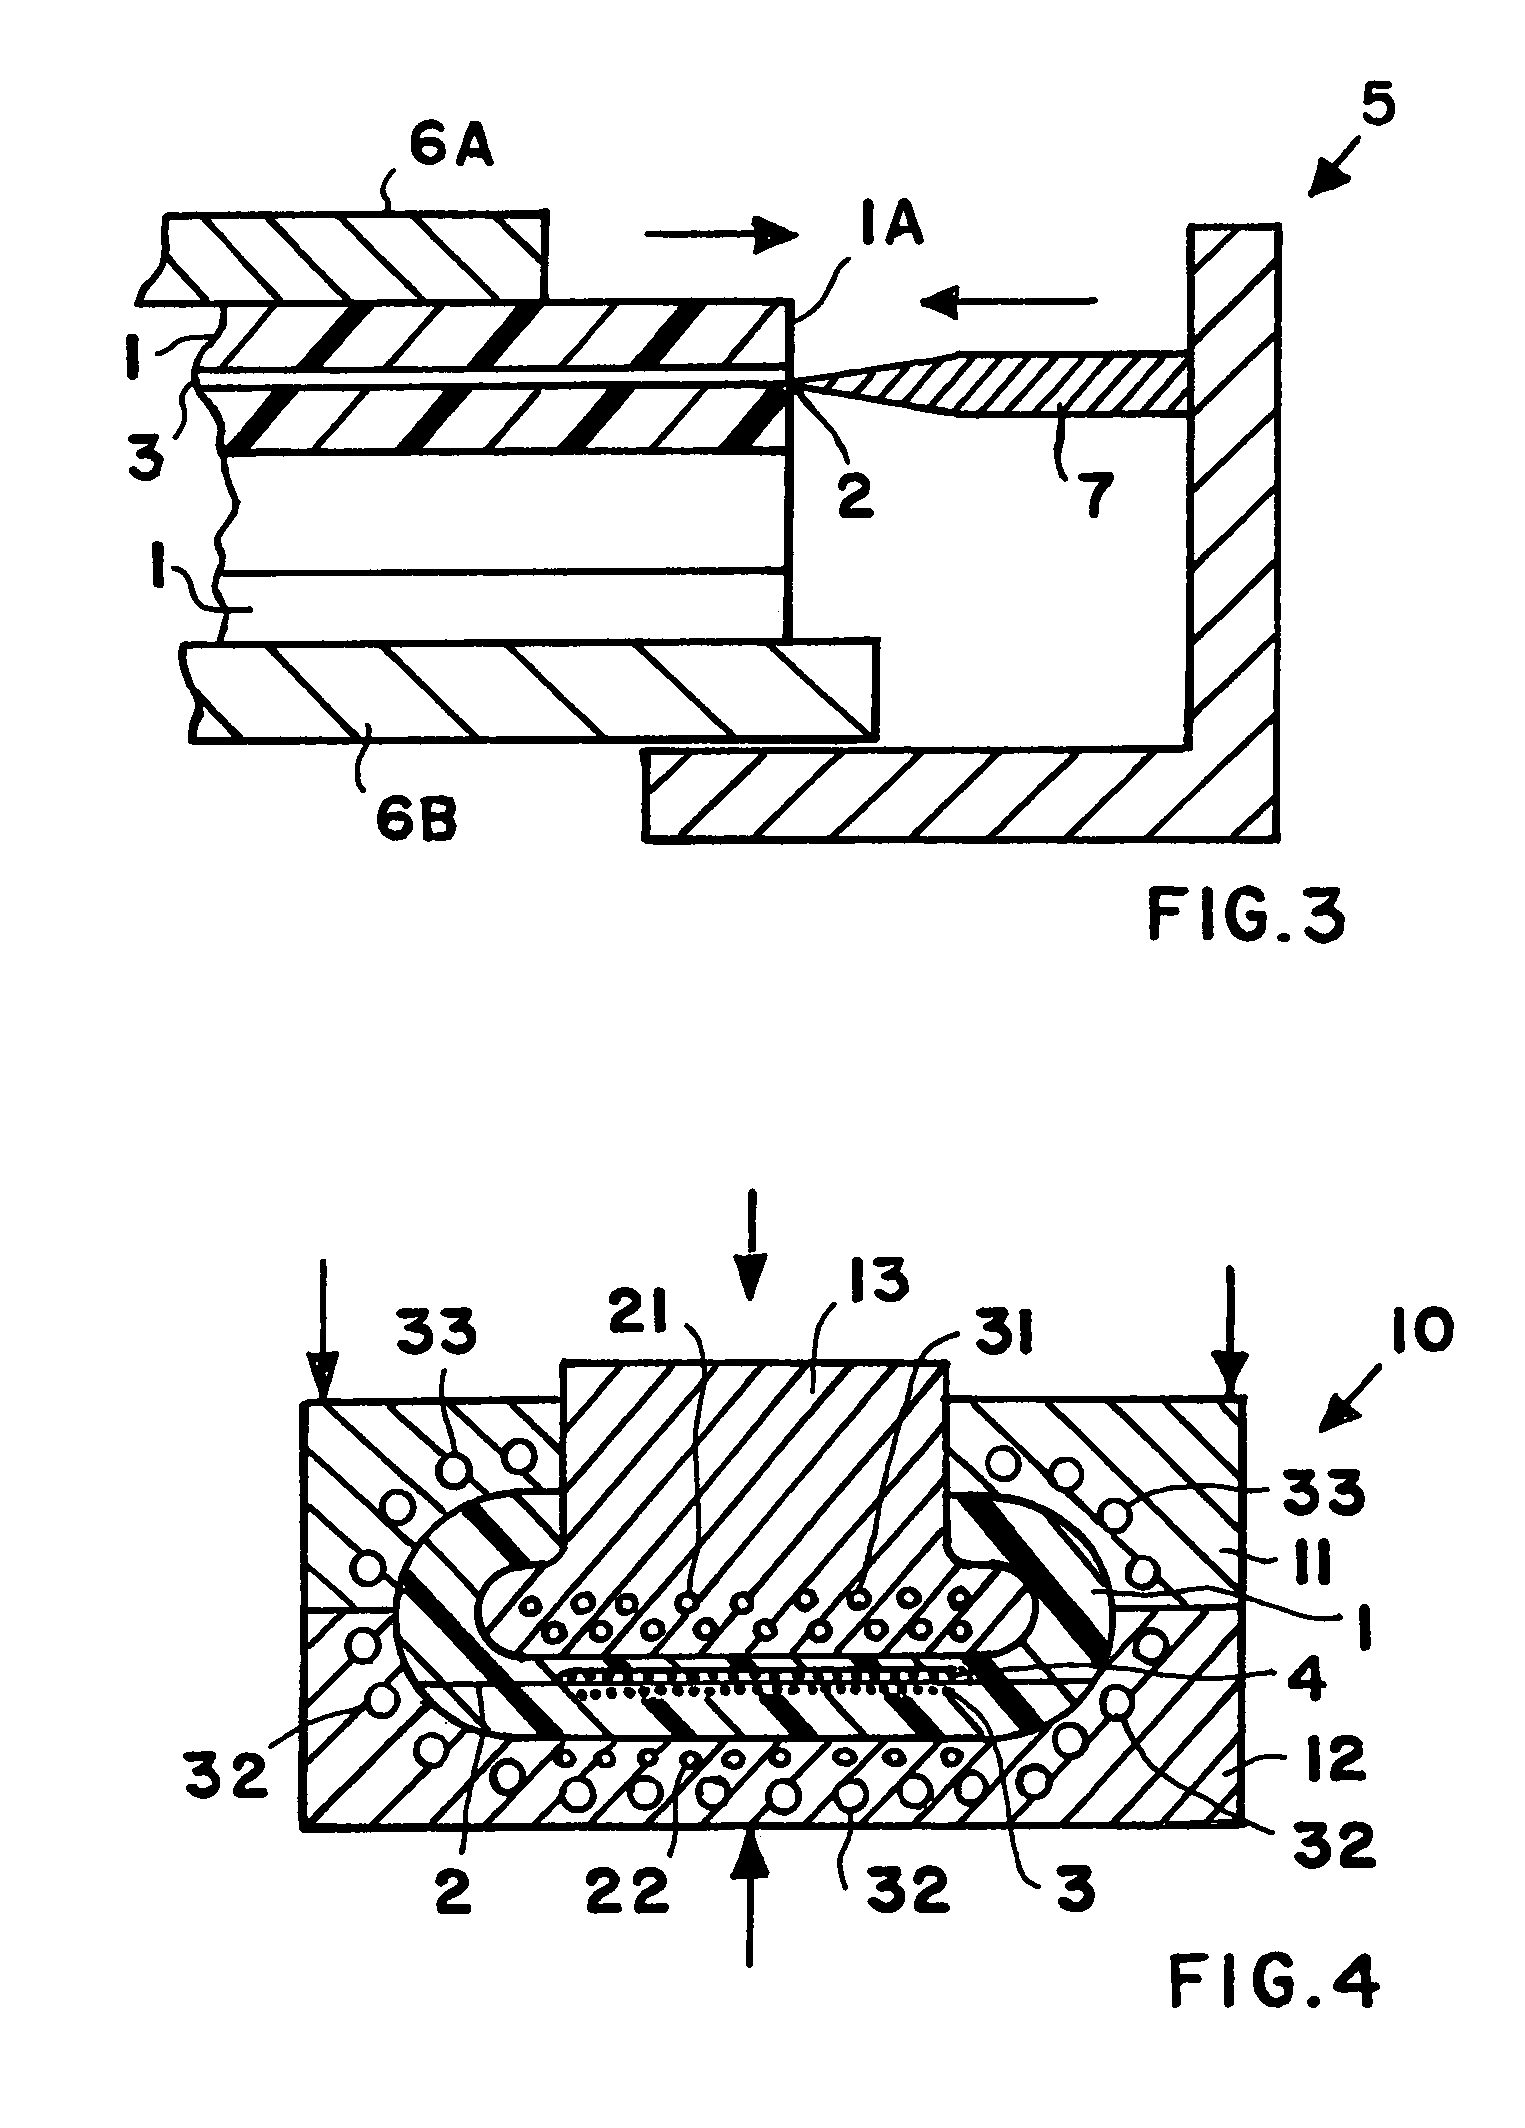 Method for continuously joining a handrail for an escalator or moving walkway